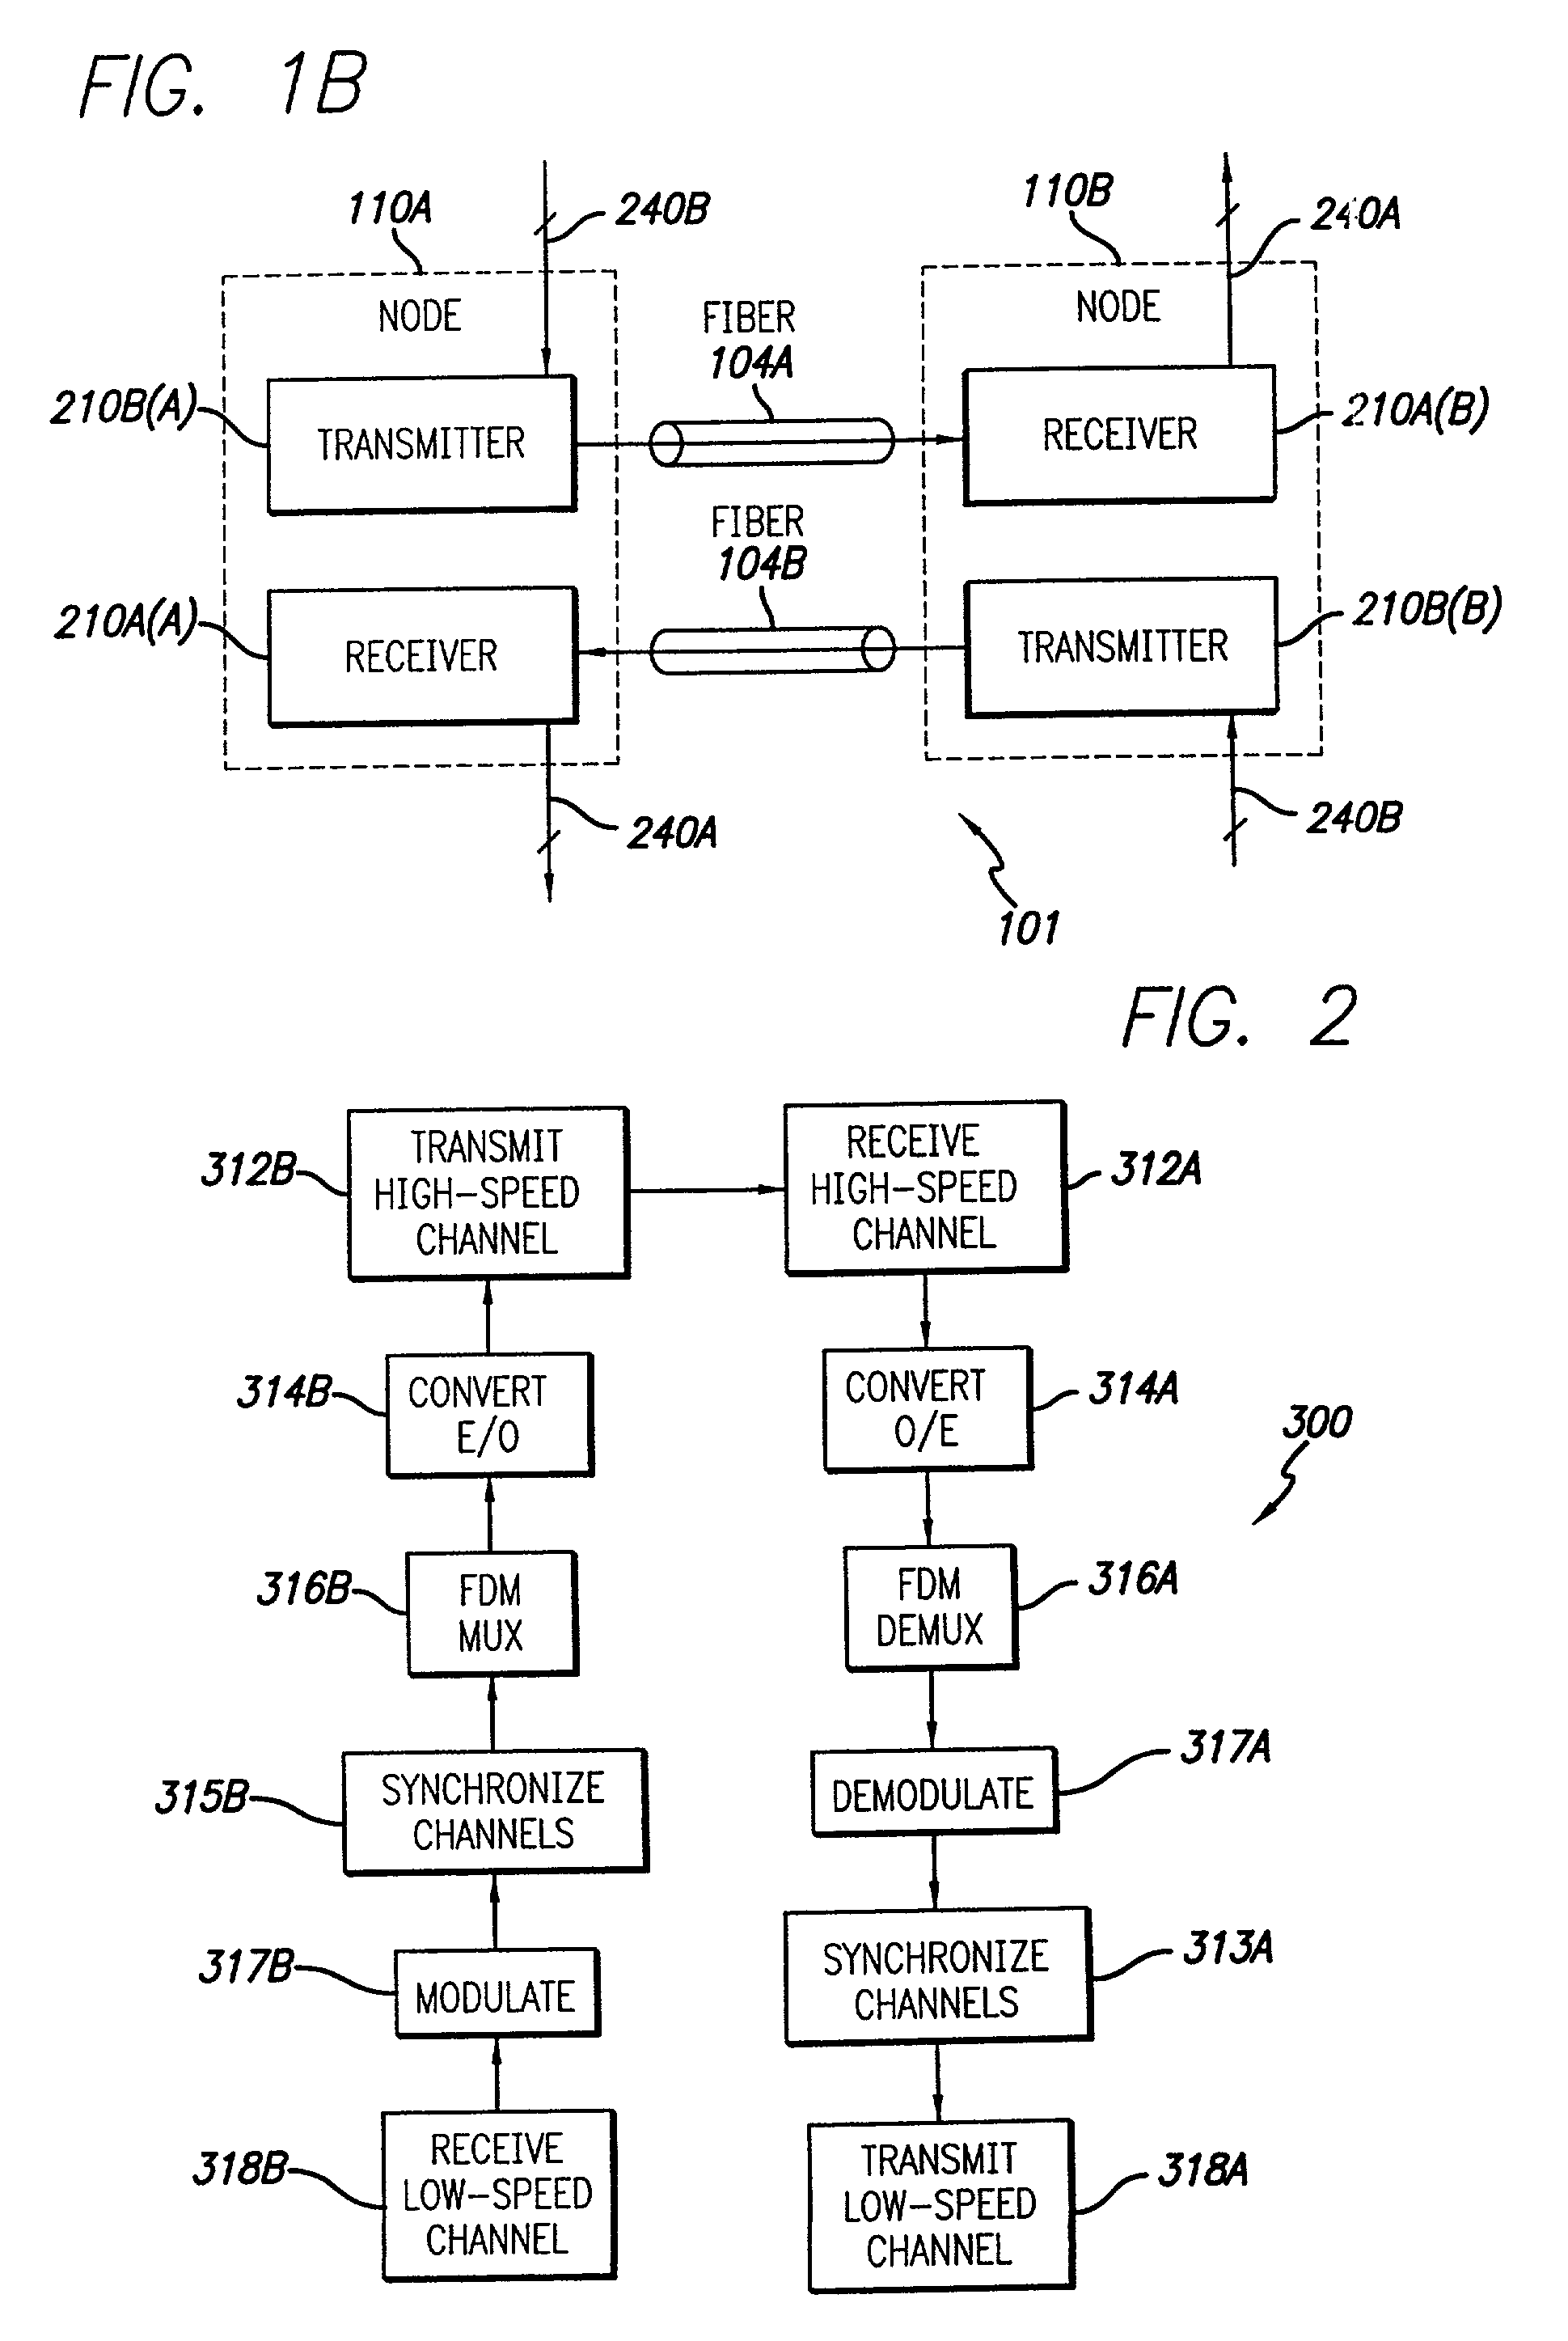 Through-timing of data transmitted across an optical communications system utilizing frequency division multiplexing